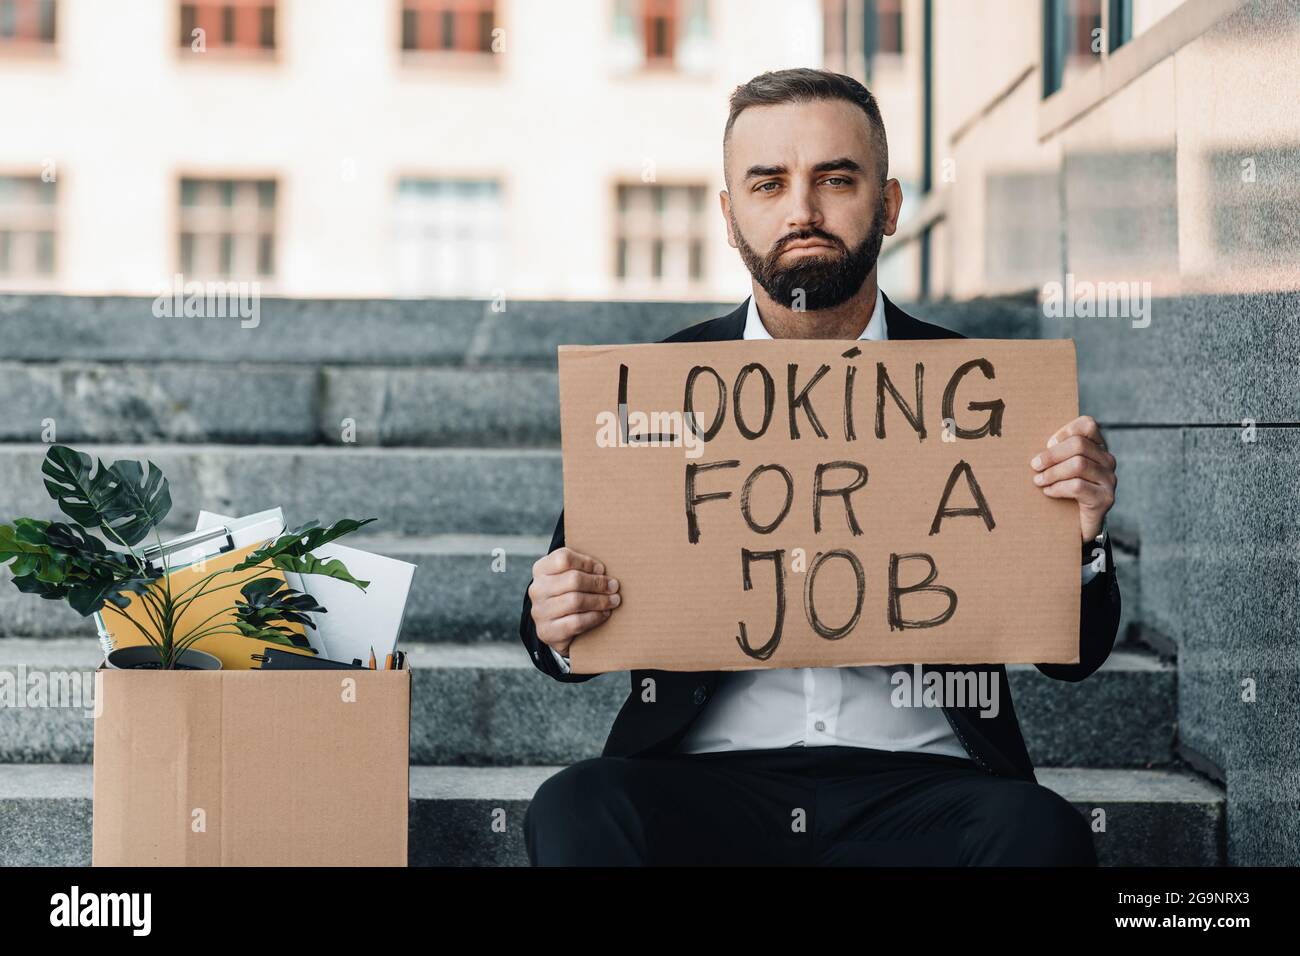 Looking for a job. Upset mature man sitting on stairs with box of personal stuff and poster, got fired due to crisis Stock Photo